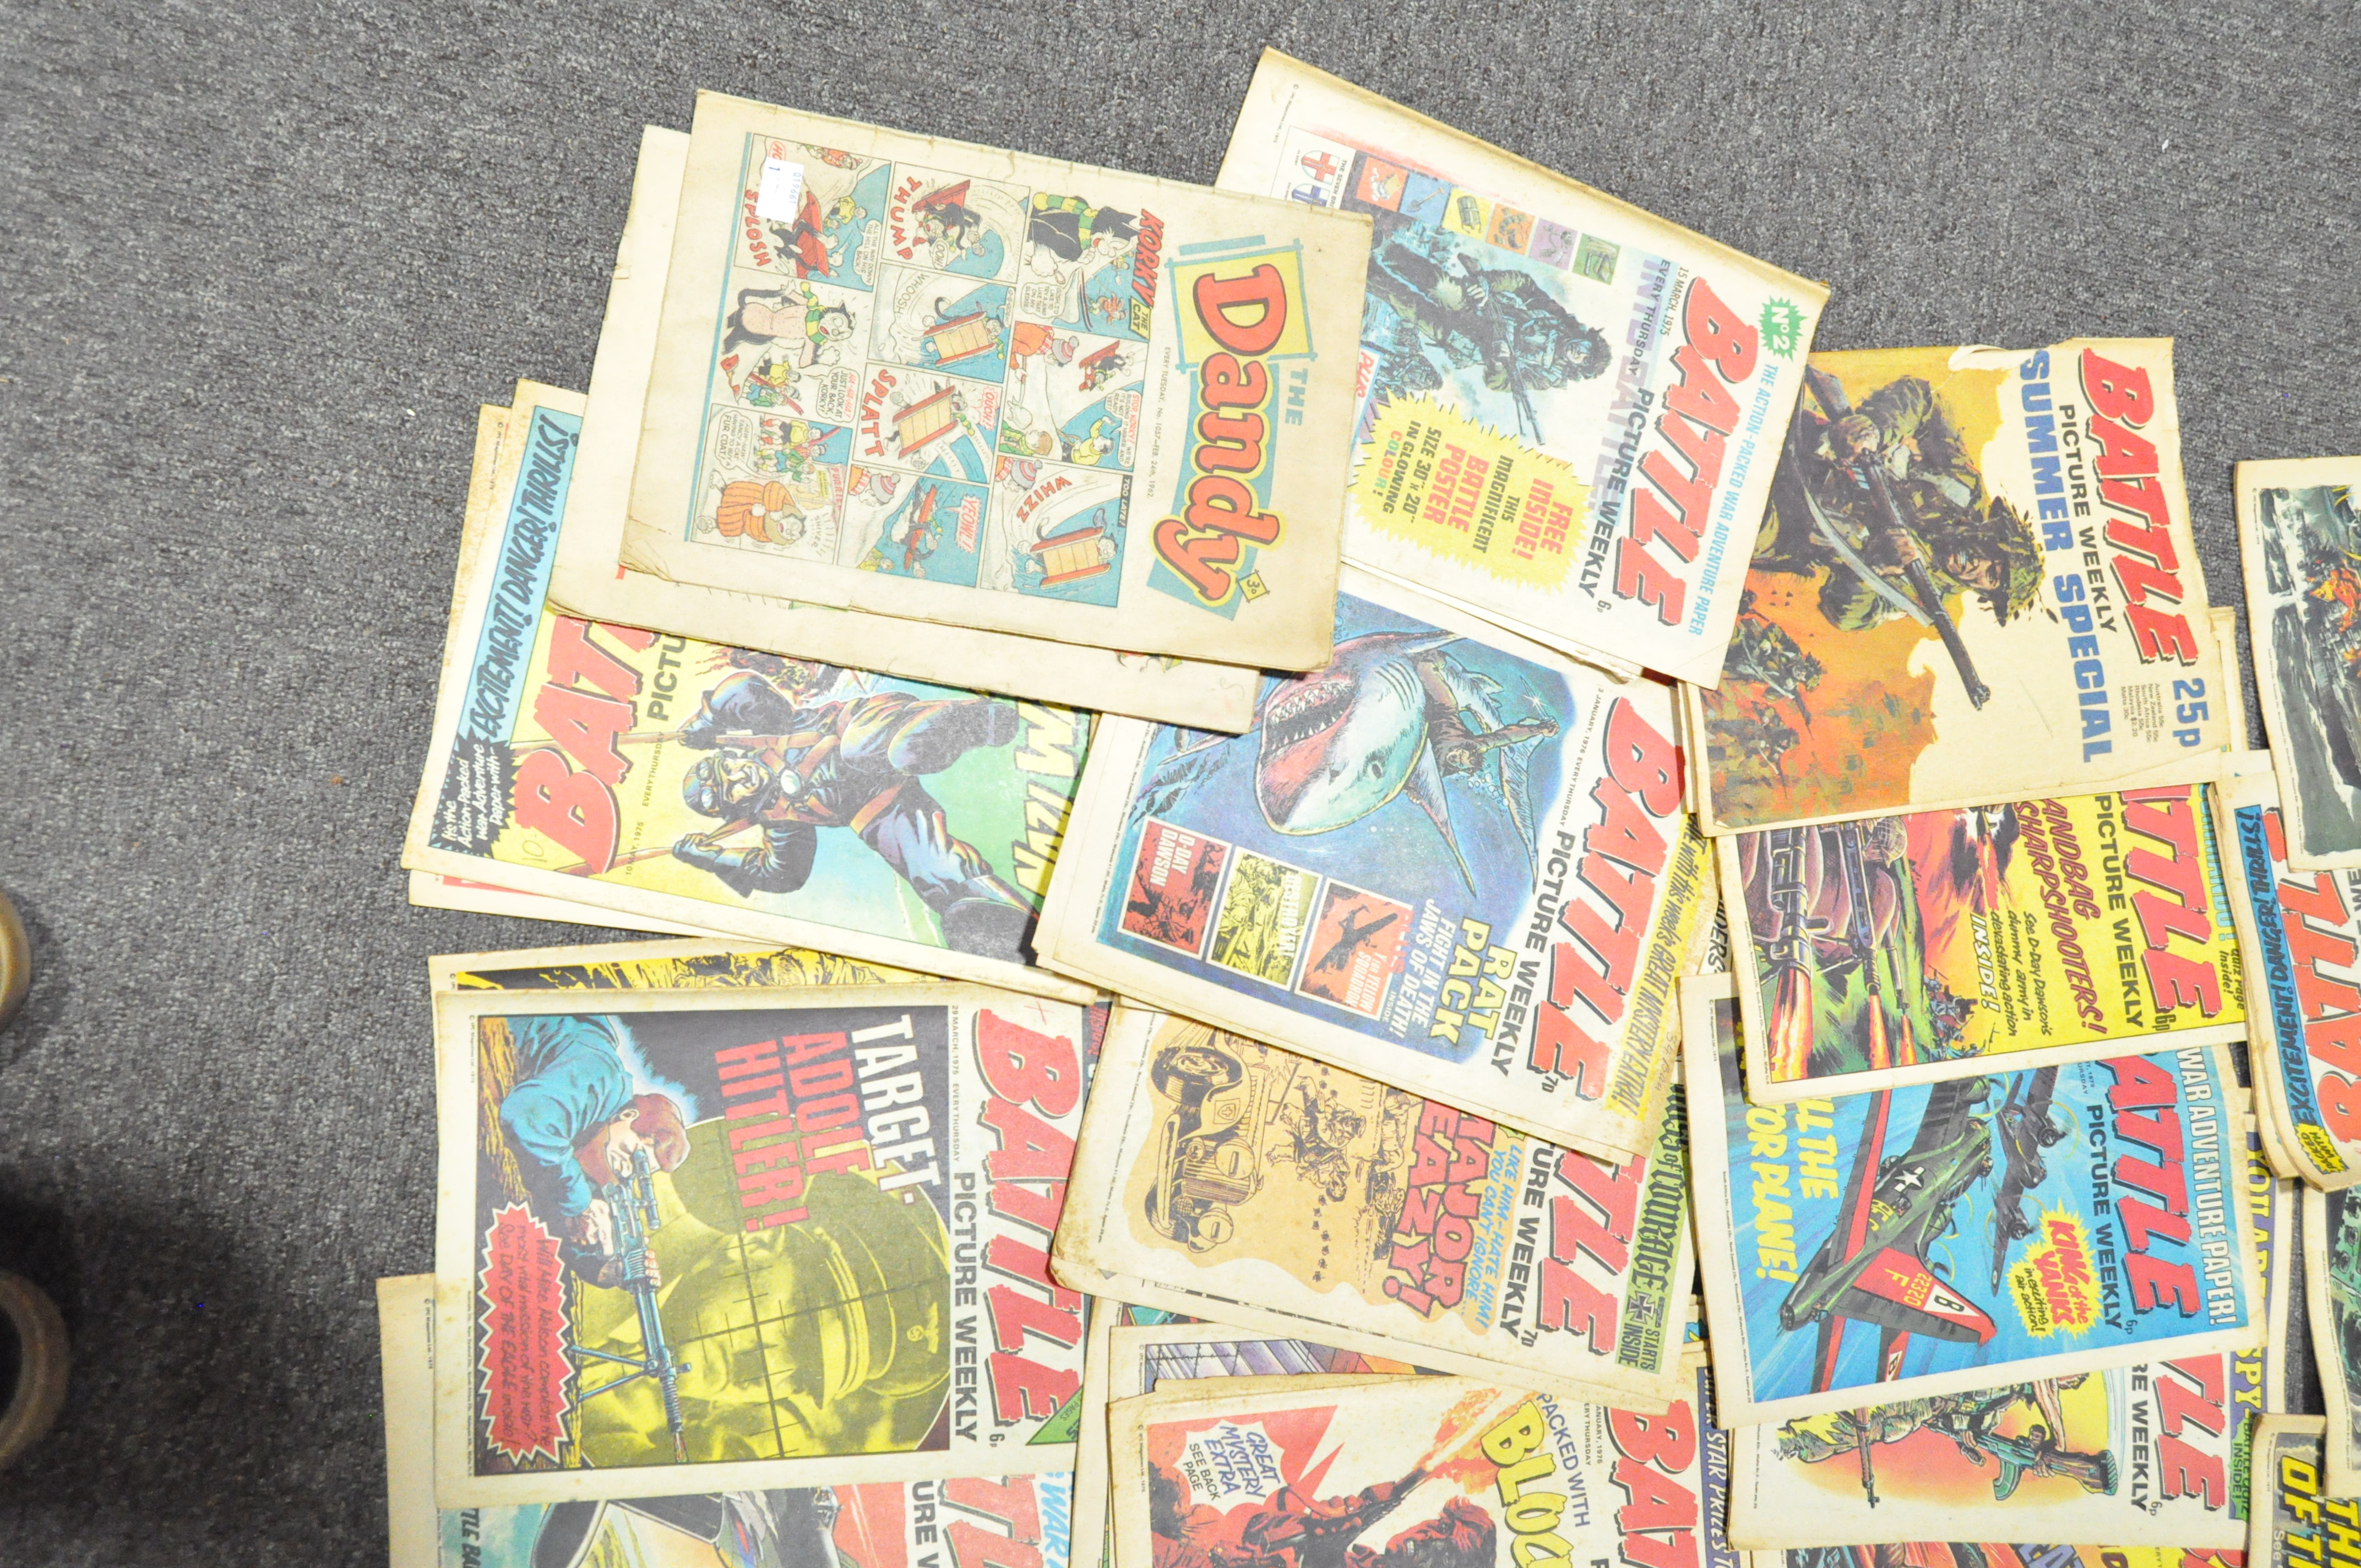 A collection of vintage comic books, including Battle and Dandy, - Image 5 of 8